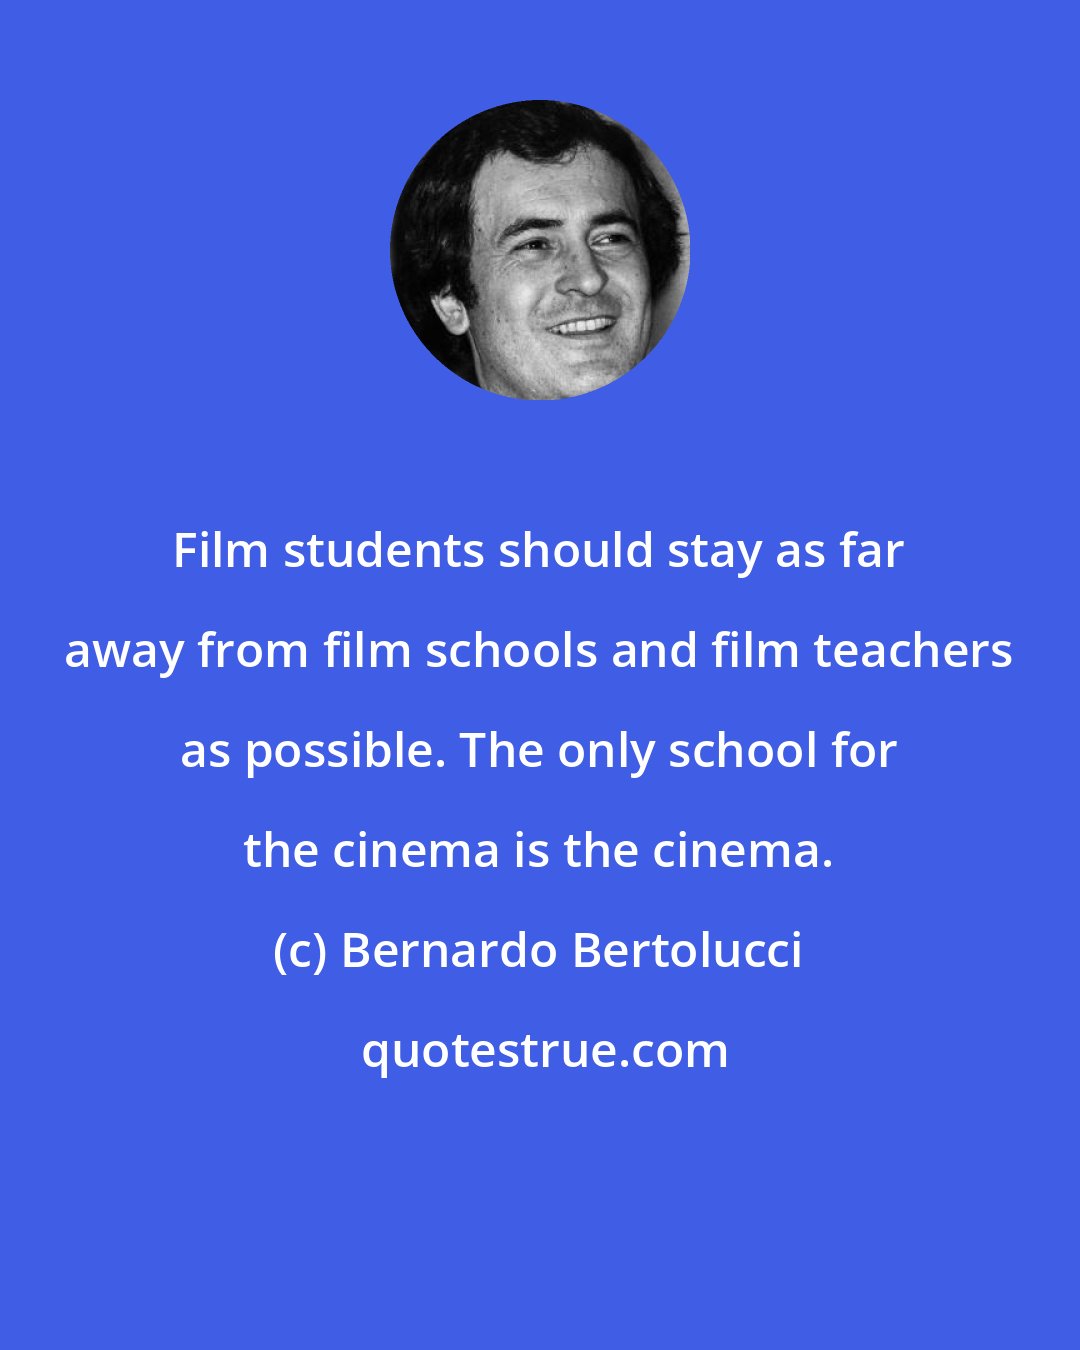 Bernardo Bertolucci: Film students should stay as far away from film schools and film teachers as possible. The only school for the cinema is the cinema.